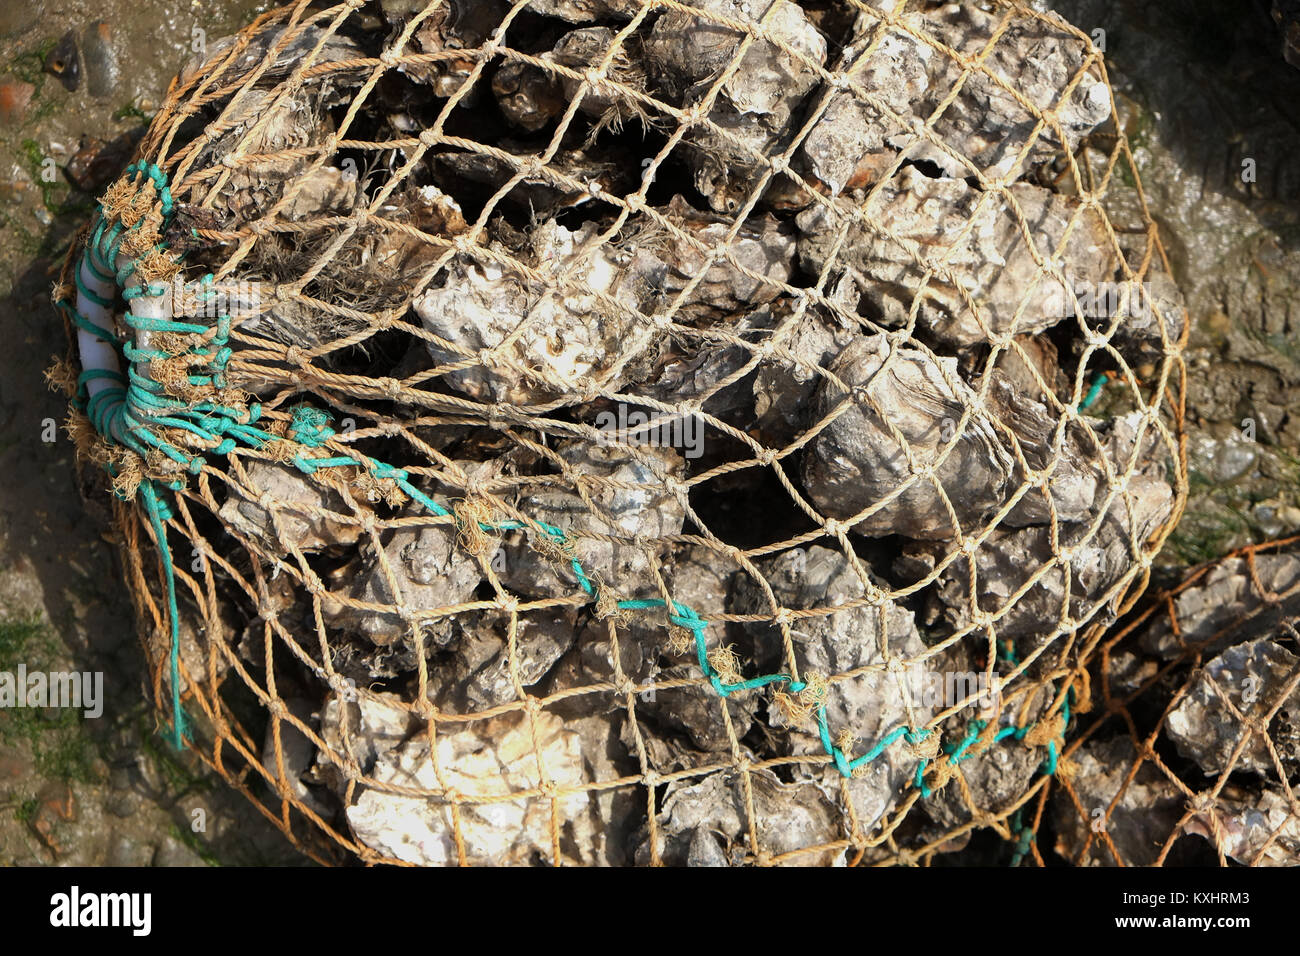 Oysters in a net Stock Photo